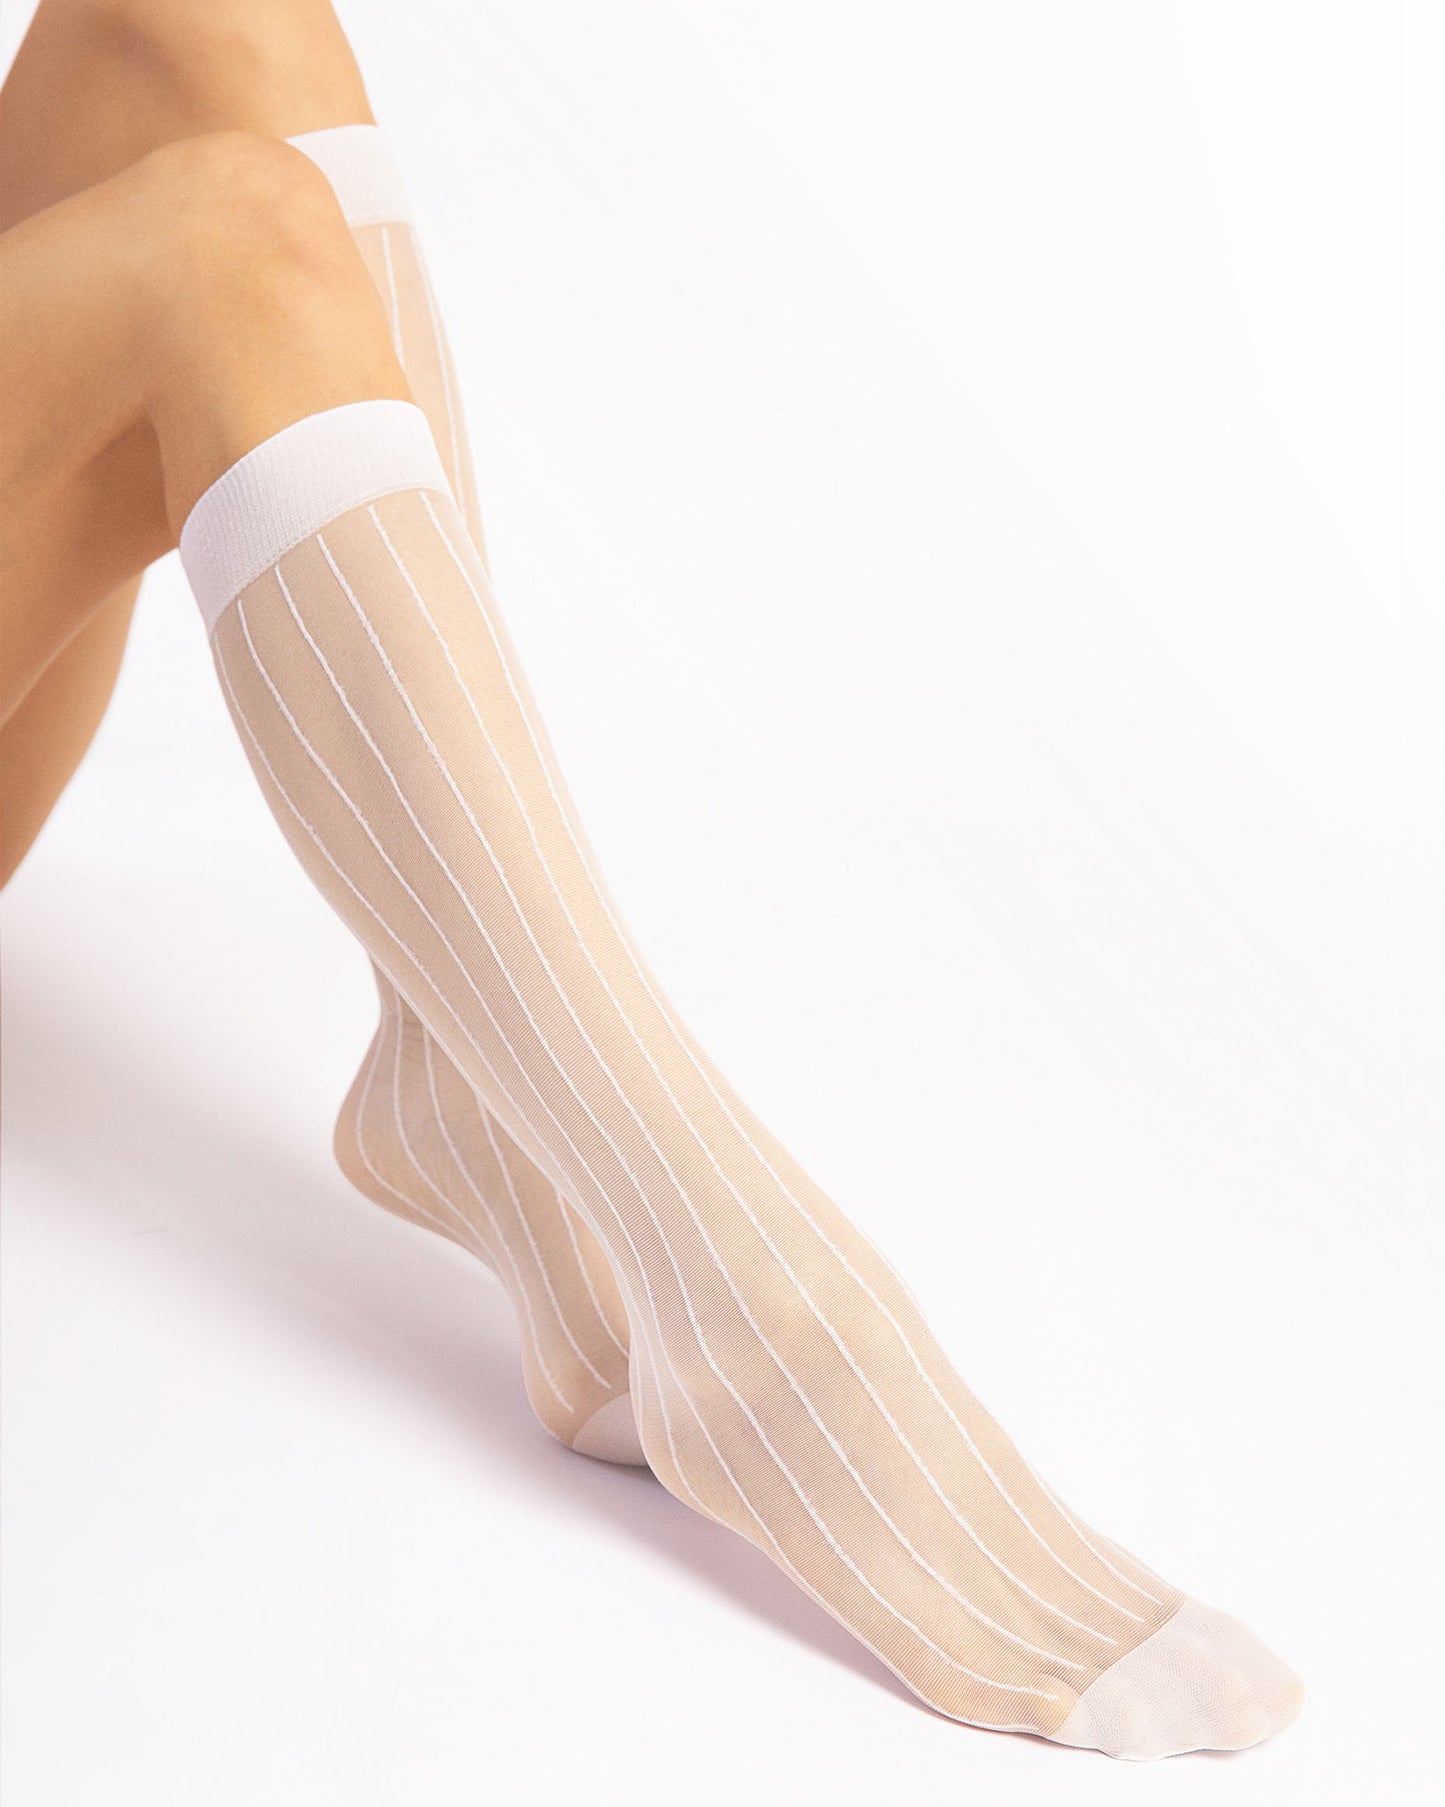 Fiore Linea 15 Den - Sheer white fashion knee-high socks with a thin vertical pinstripe pattern, plain elasticated cuff and sheer reinforced toe.